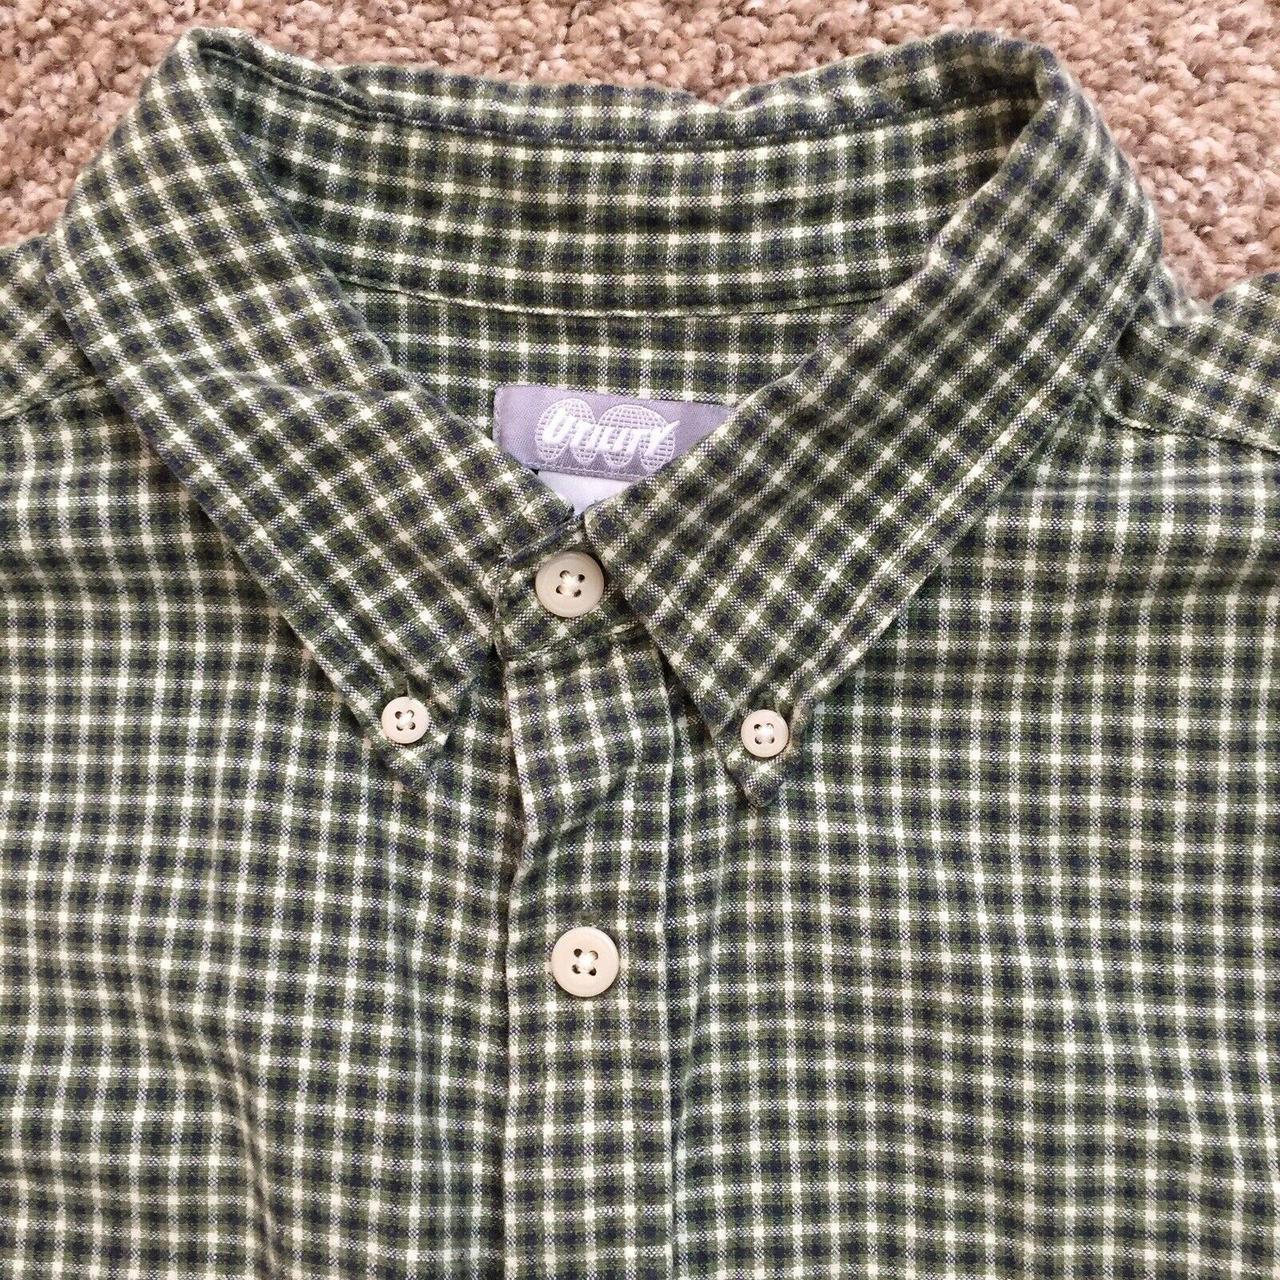 Product Image 2 - Utility Mens Large Green/White Check